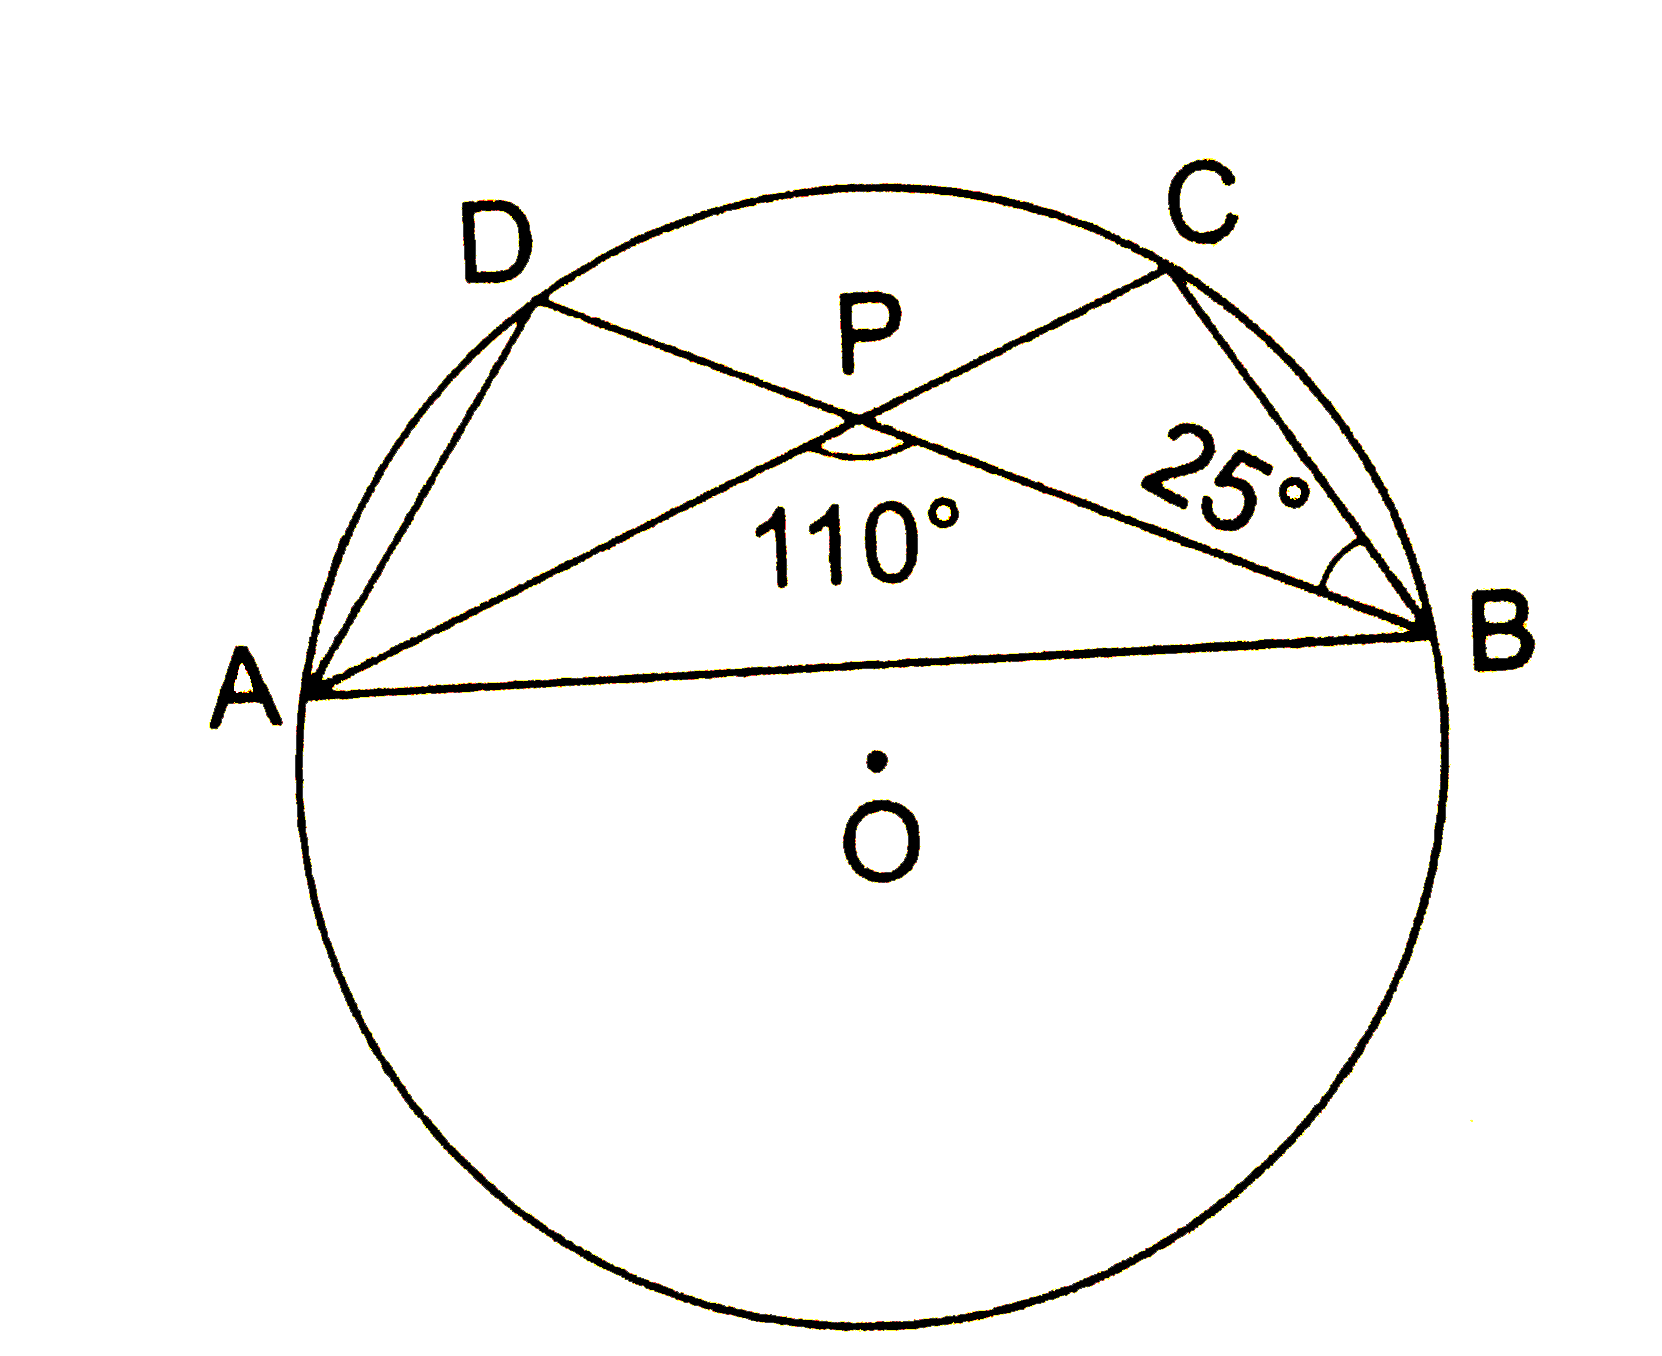 In the given figure, O is the centre of the circle. If /PBC = 25^(@) and / APB = 110^(@), find  the value of / ADB.